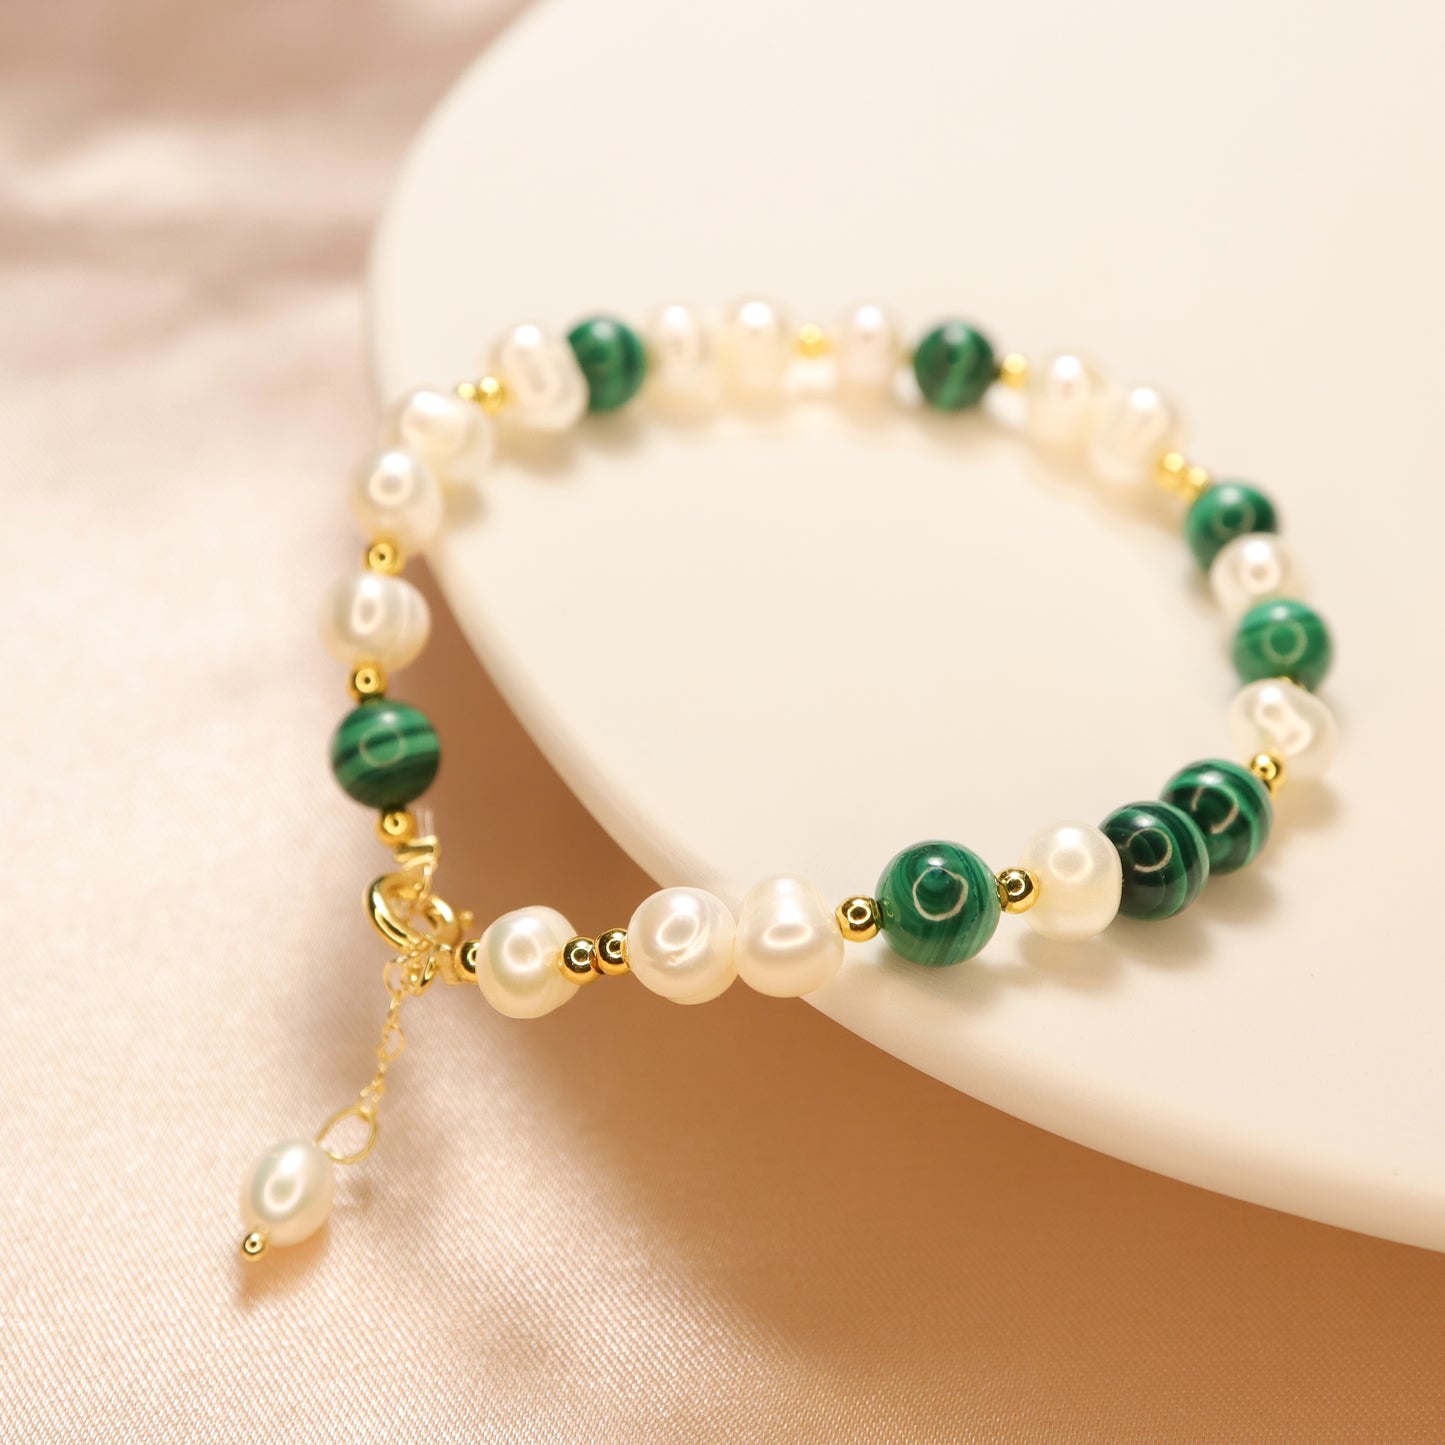 Peacock Prime -  Freshwater Pearl & Malachite Bracelet With Adjustable Chain